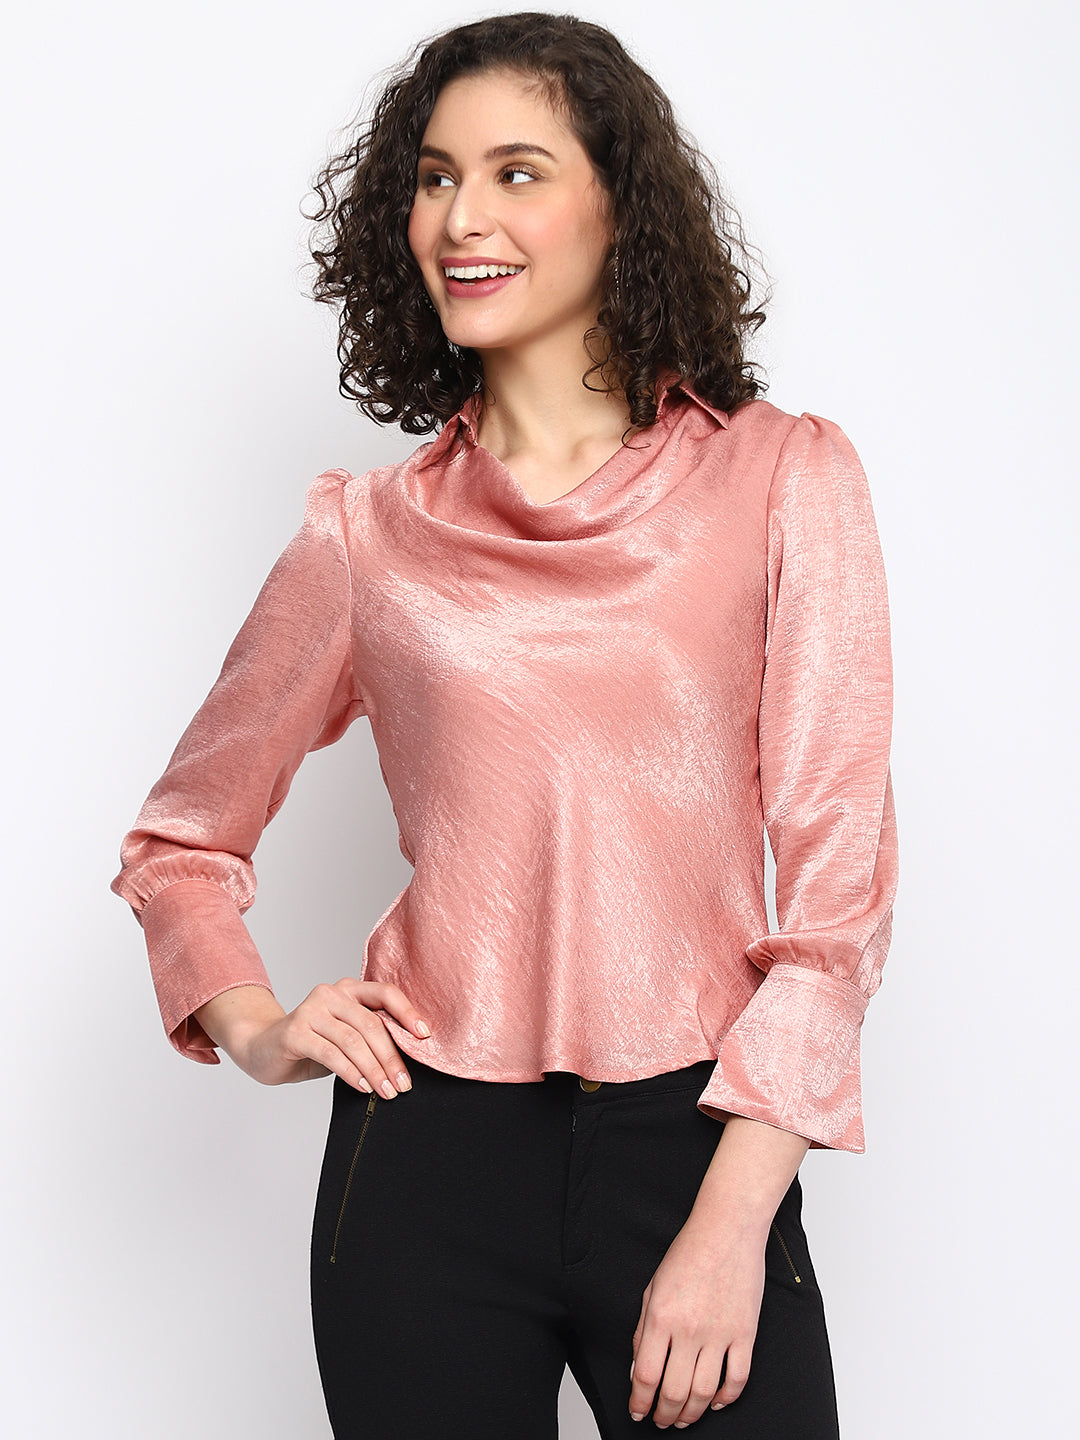 Pink Full Sleeve Solid Polyester Blouse